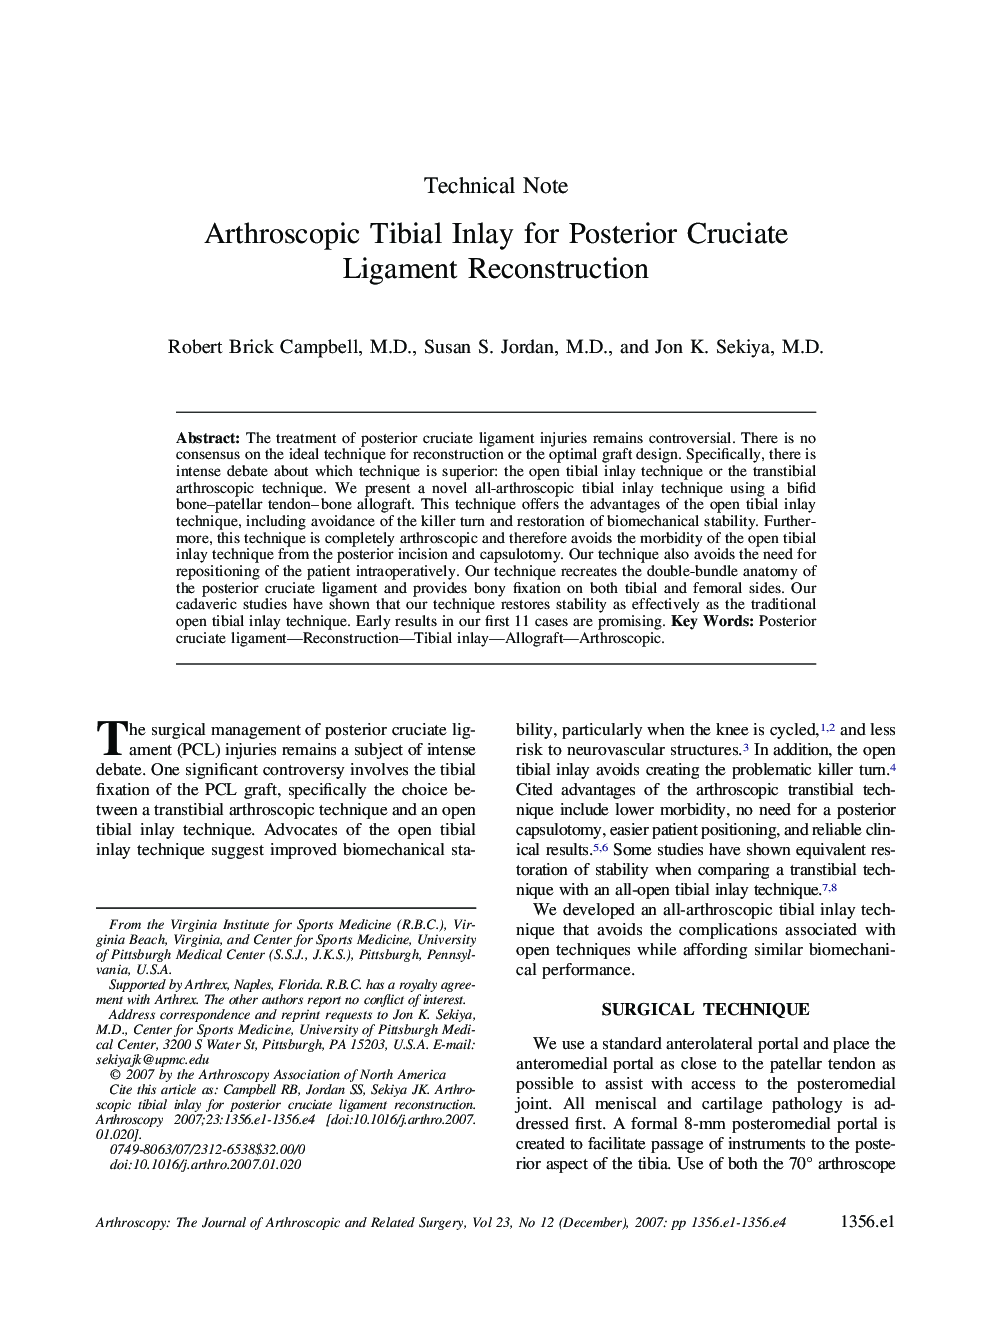 Arthroscopic Tibial Inlay for Posterior Cruciate Ligament Reconstruction